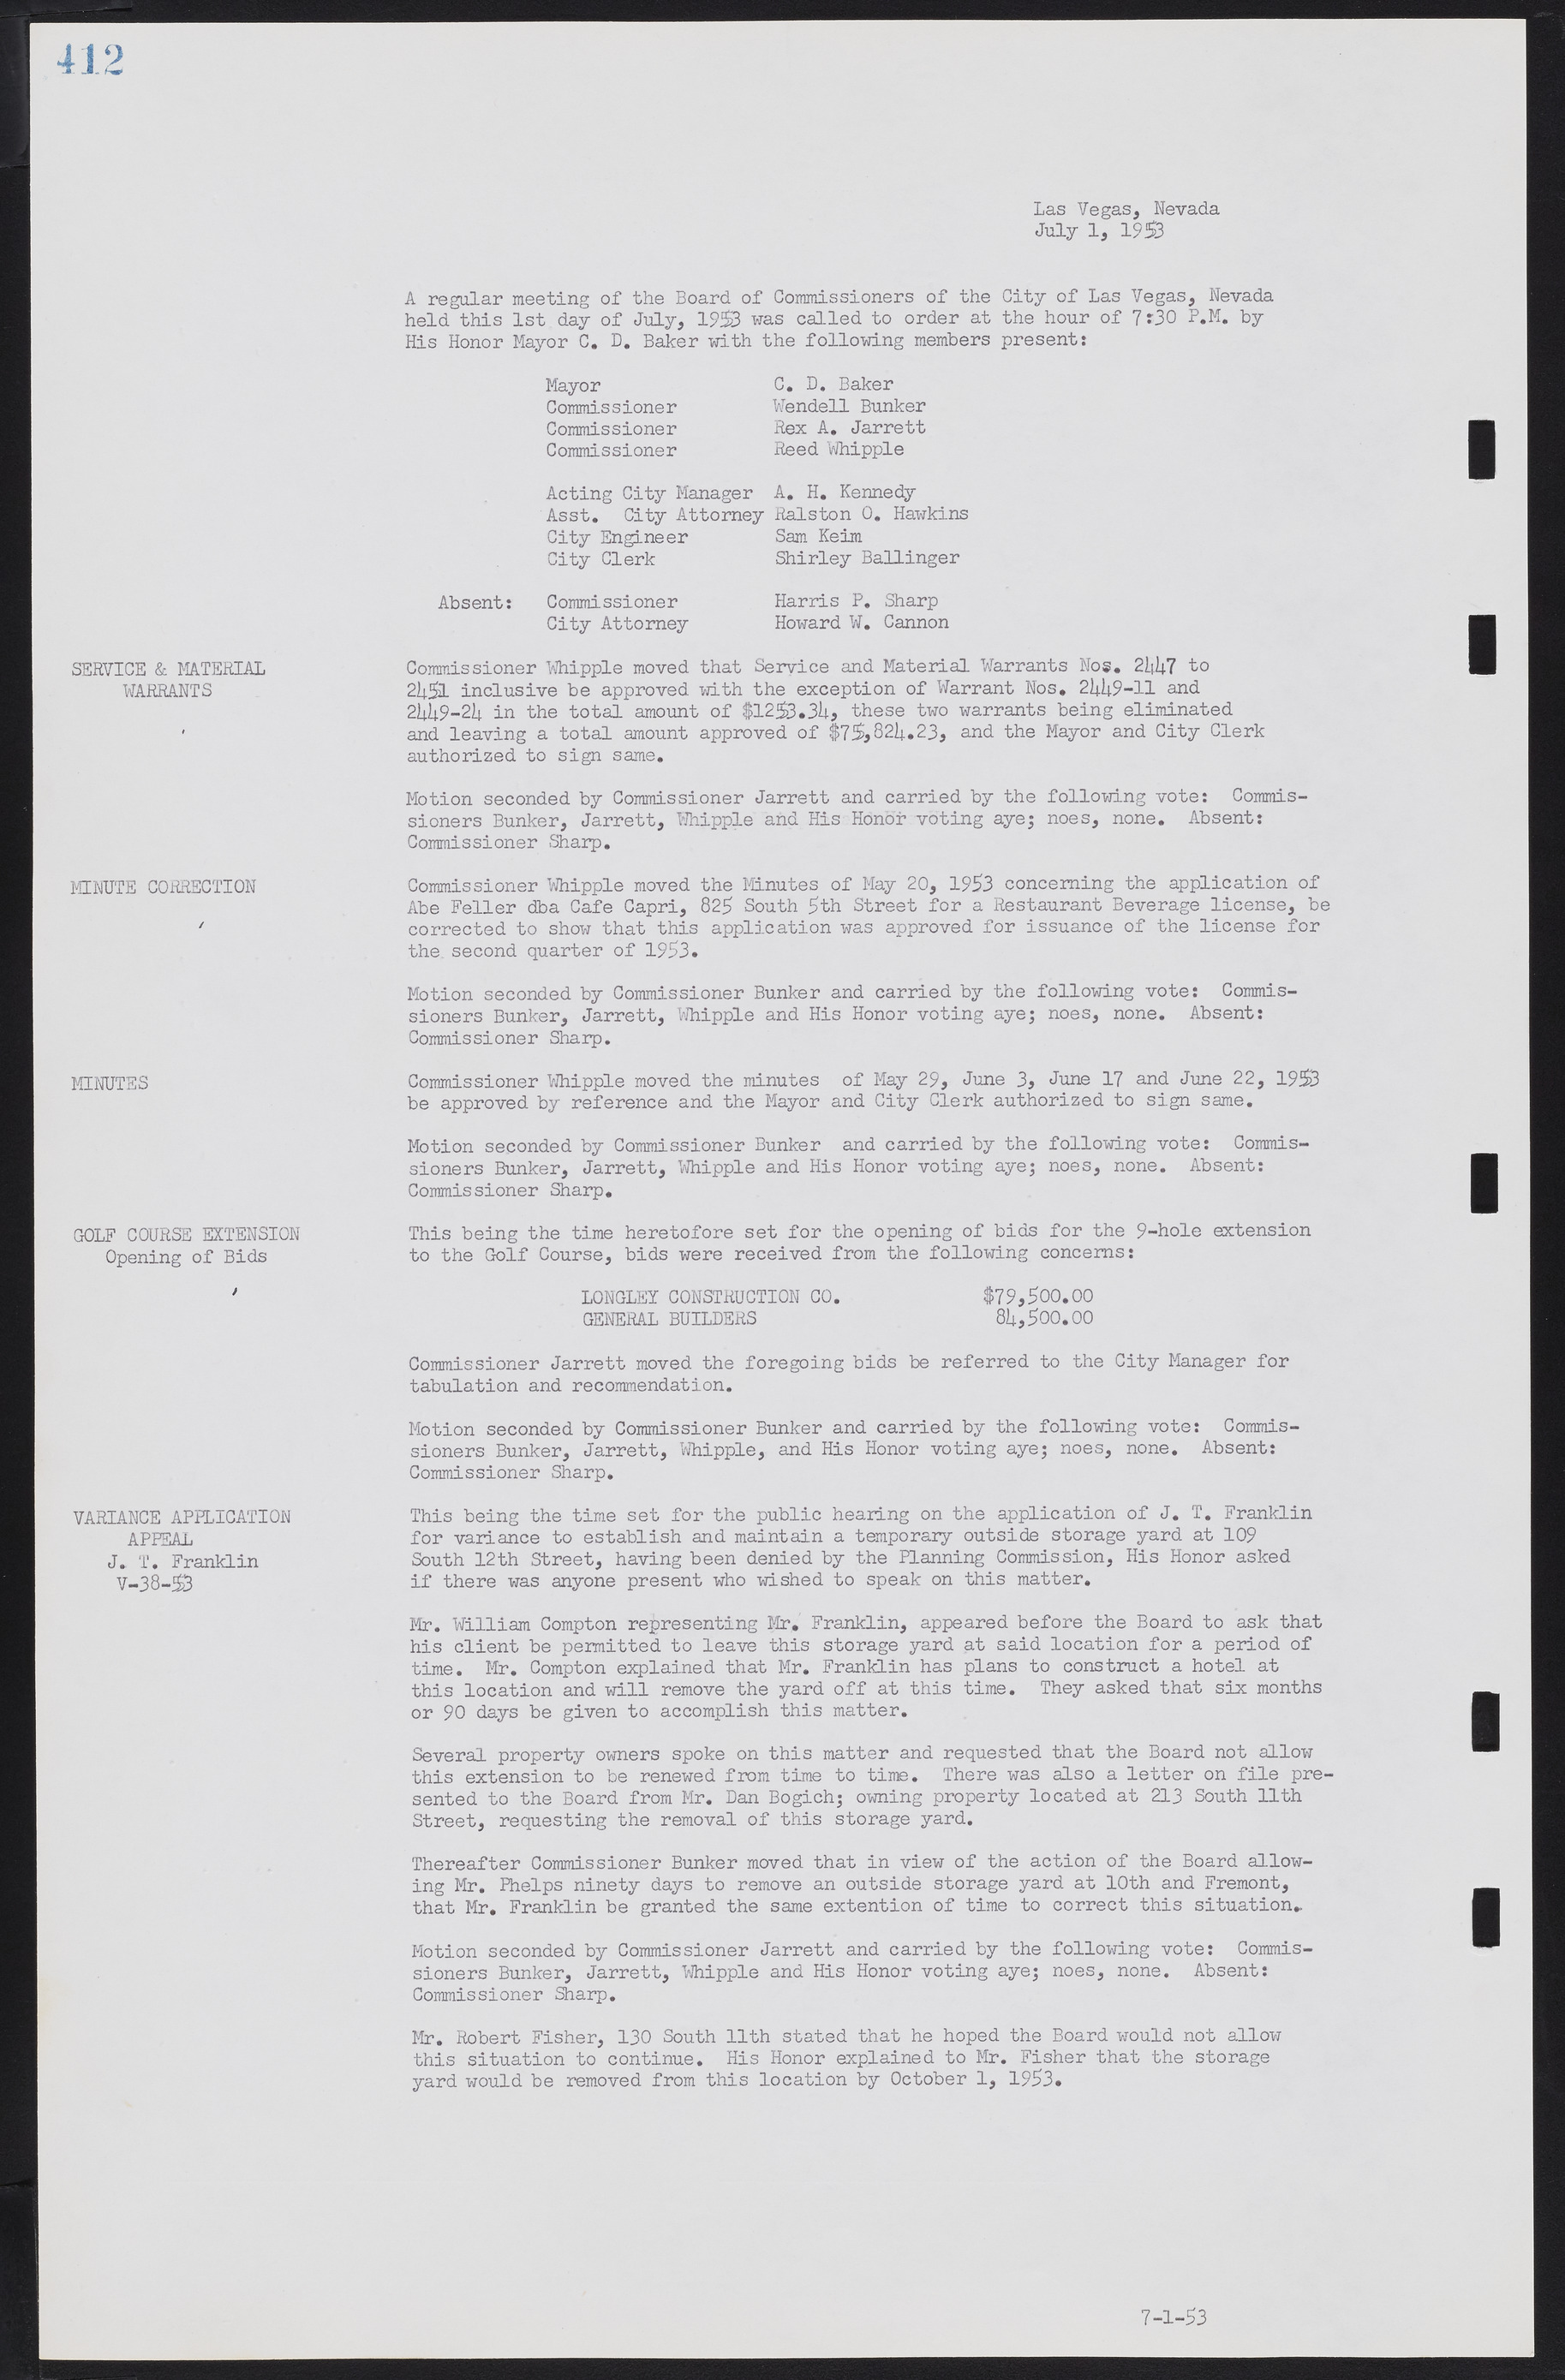 Las Vegas City Commission Minutes, May 26, 1952 to February 17, 1954, lvc000008-440